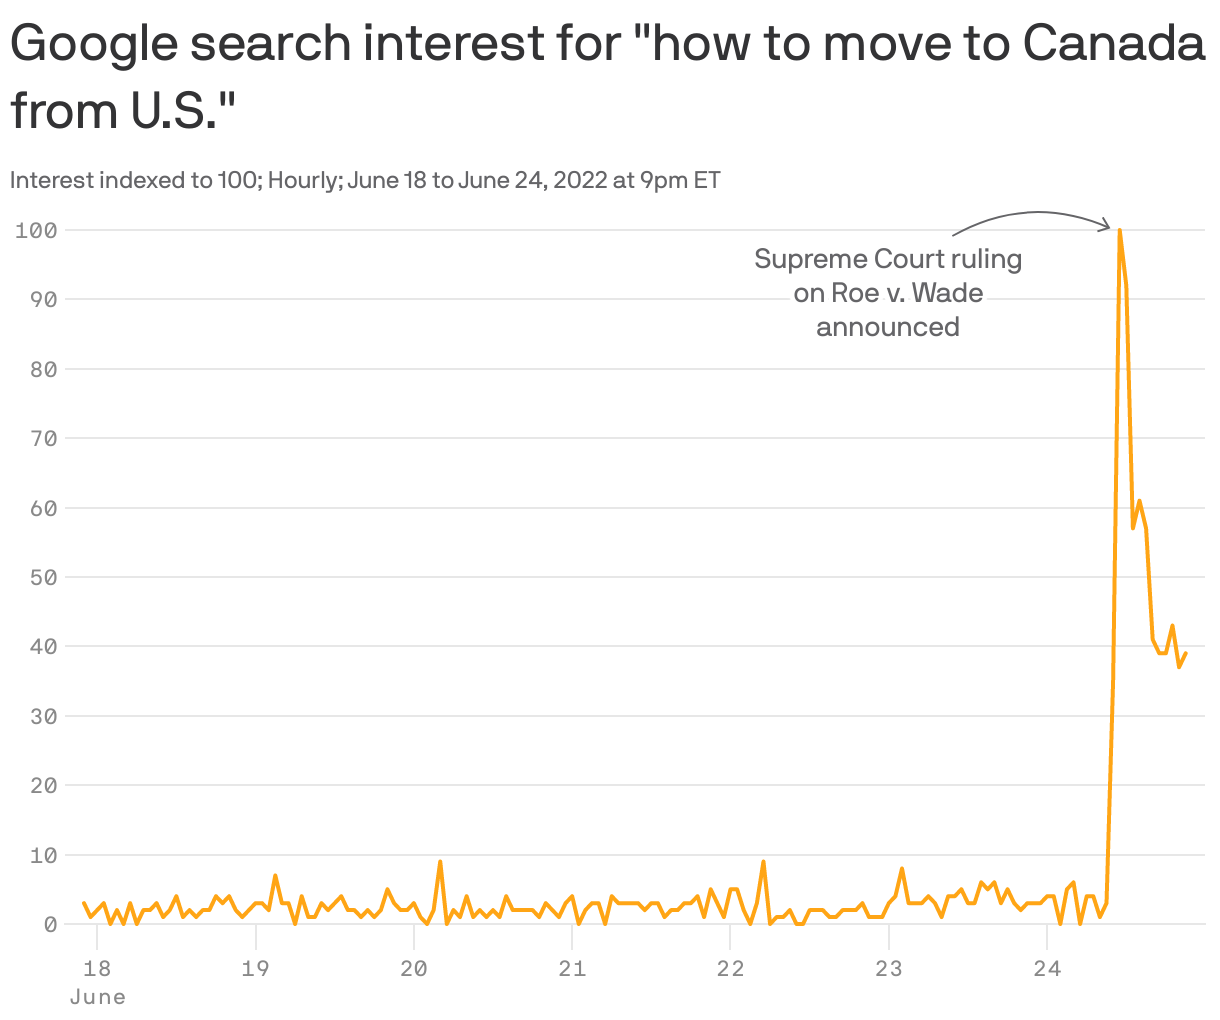 Google search interest for "how to move to Canada from U.S."